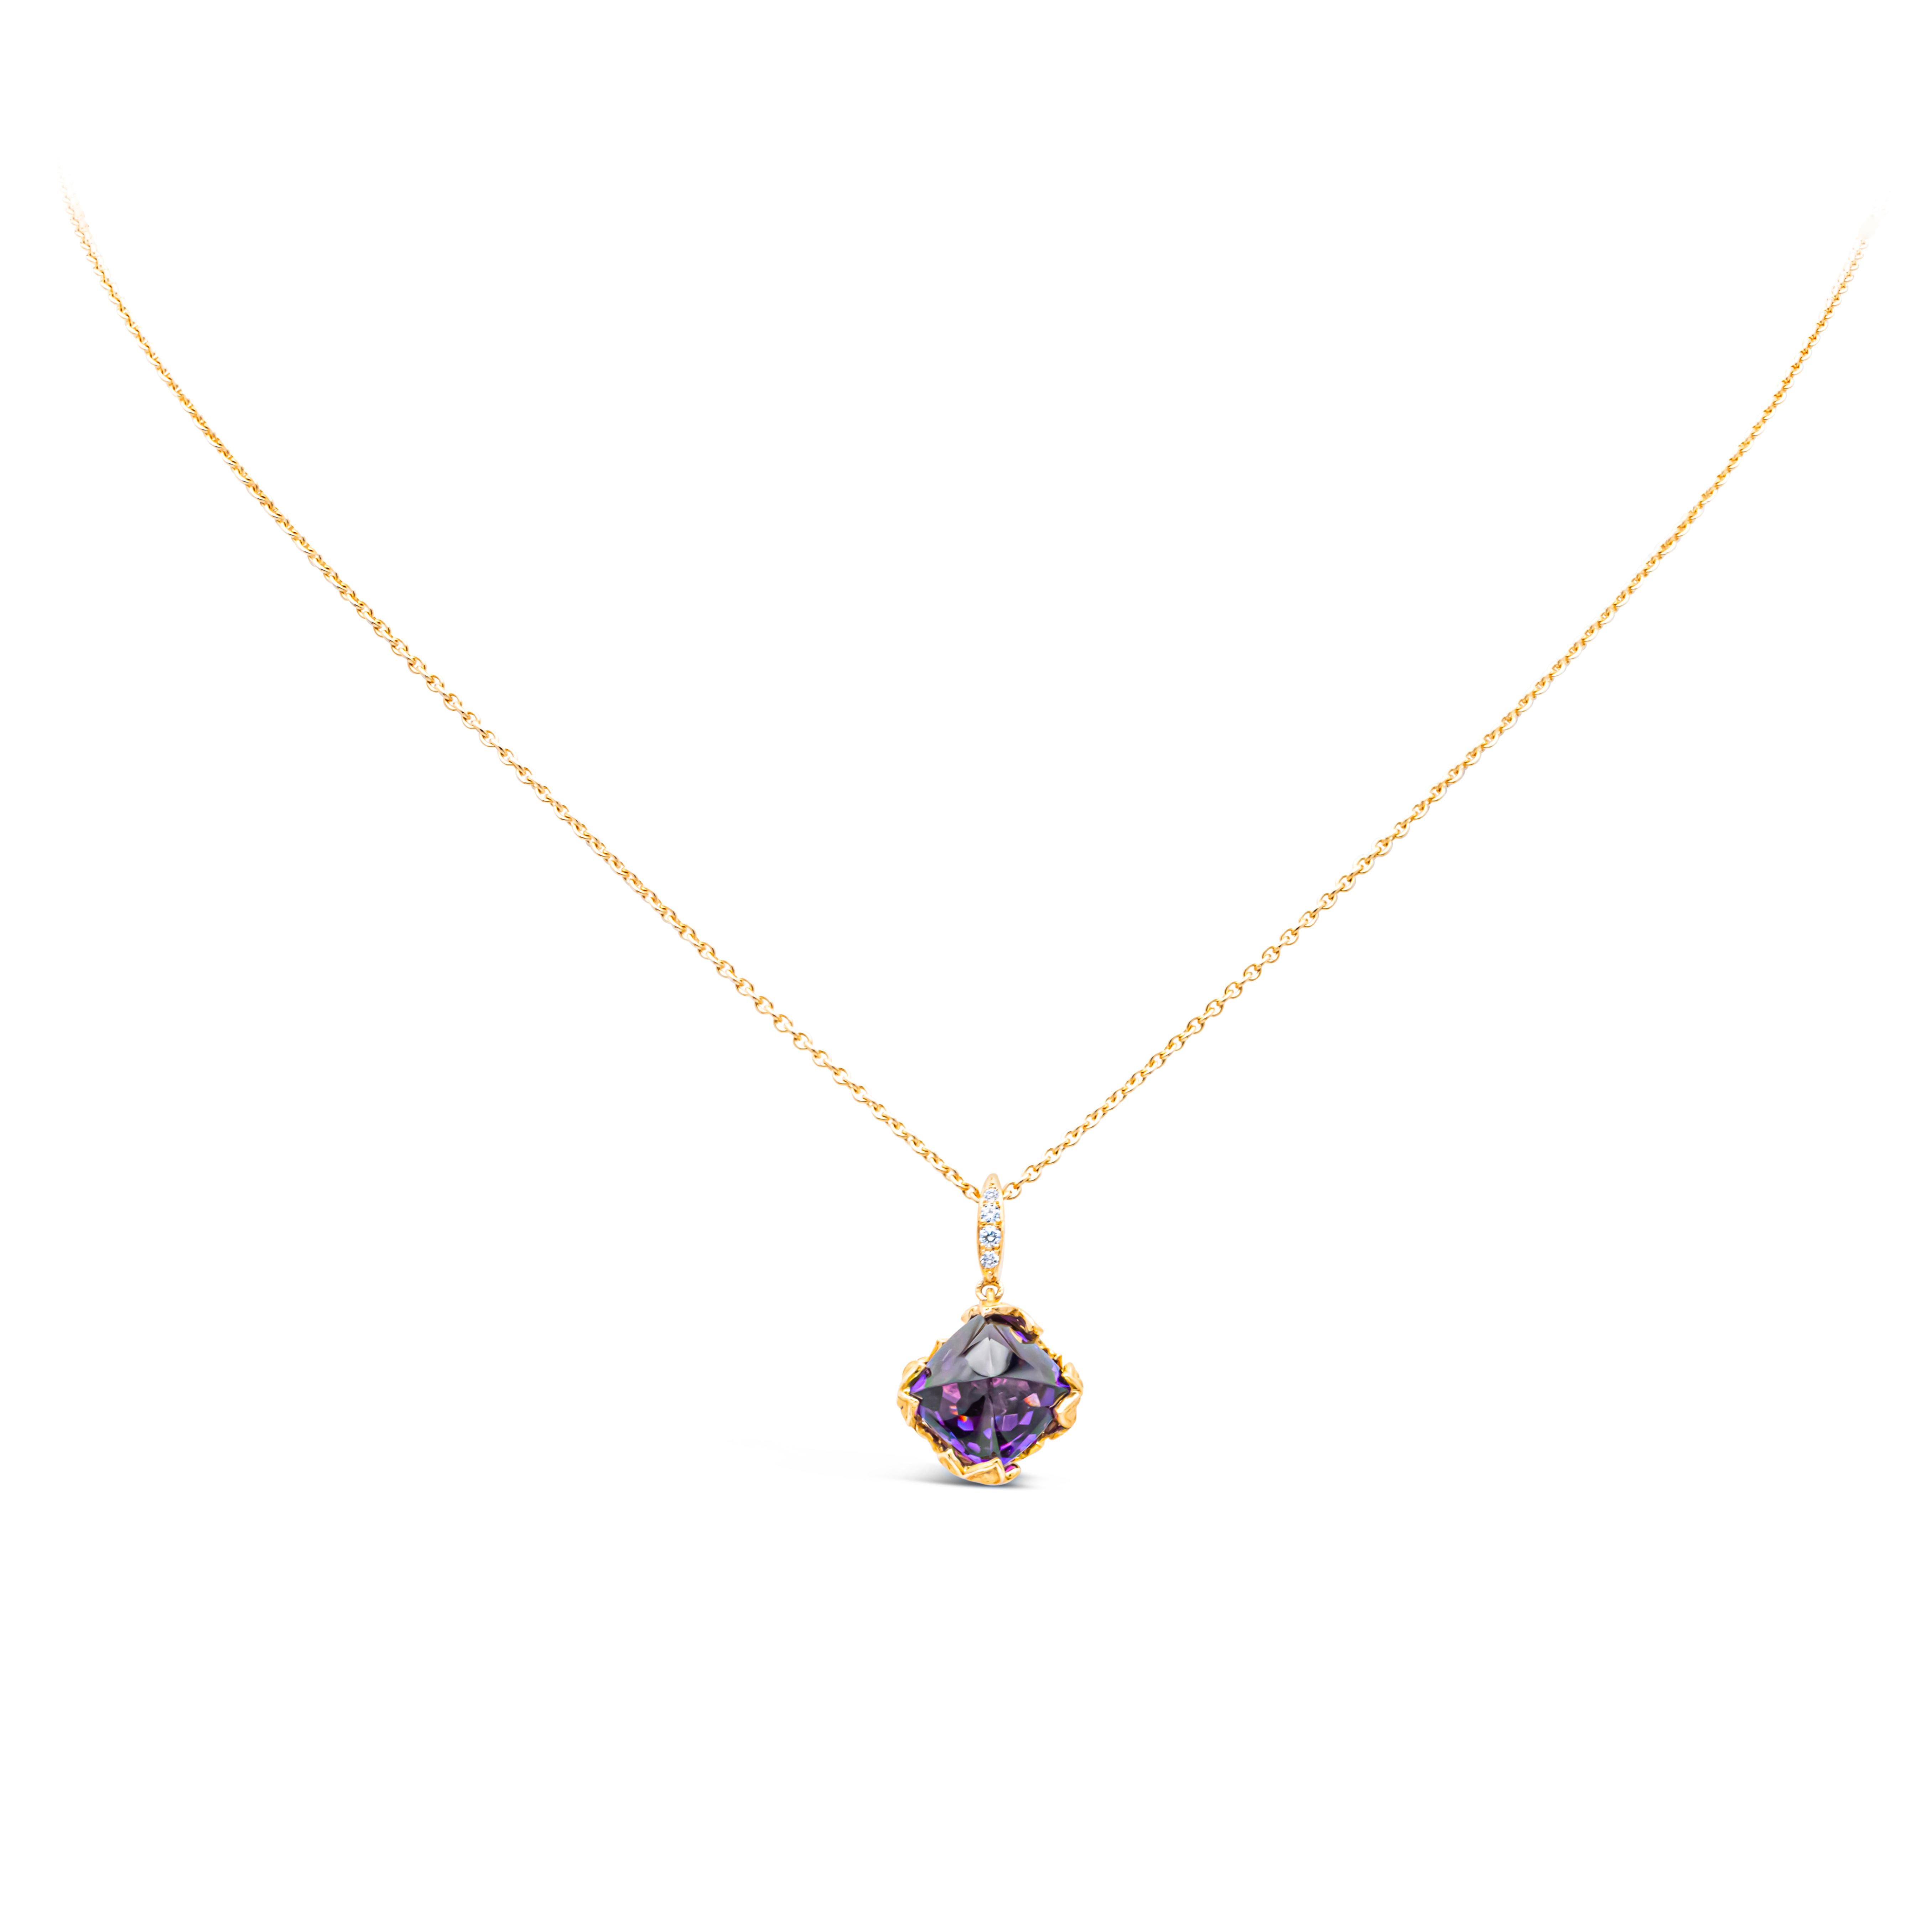 Signed by Carrera y Carrera, this elegant lia pendant necklace with 2.83 carats sugarloaf amethyst and 0.02 diamond is made in 18K Yellow Gold. Perfect for special occasion or a gift for loved one. 

Roman Malakov Diamonds is an authorized dealer of